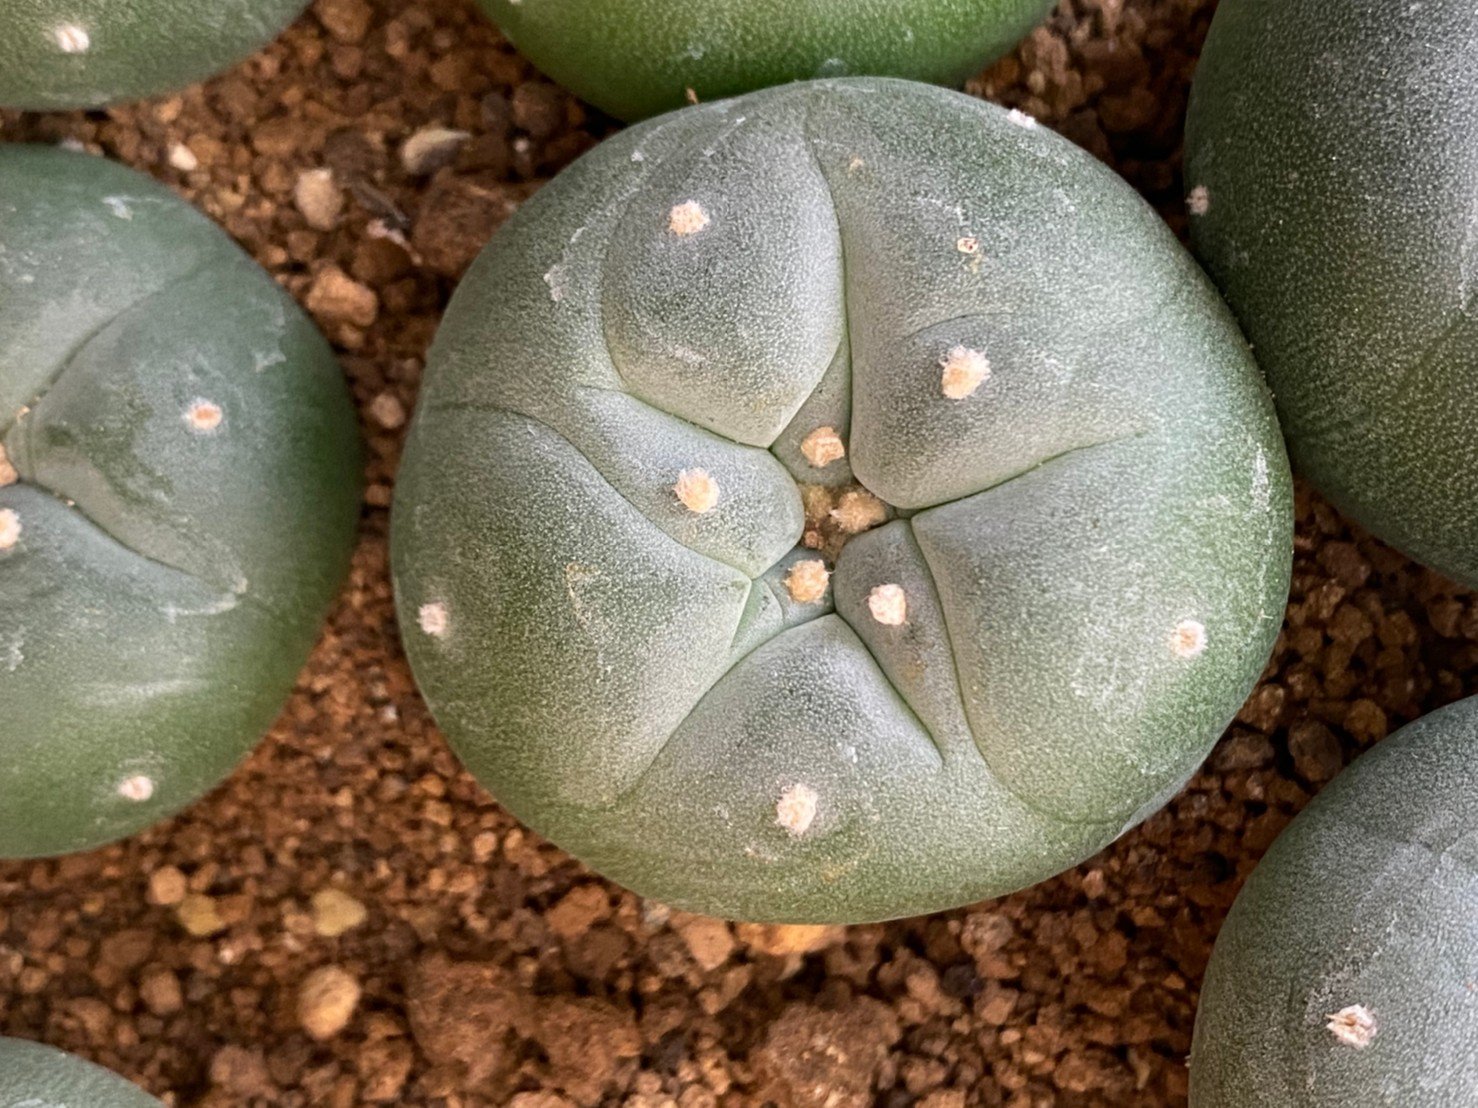 lophophora fricii super white size 3-4 cm japan import 7 years old - can give flower and seed including PHYTOSANITARY CERTIFICATES and cites document